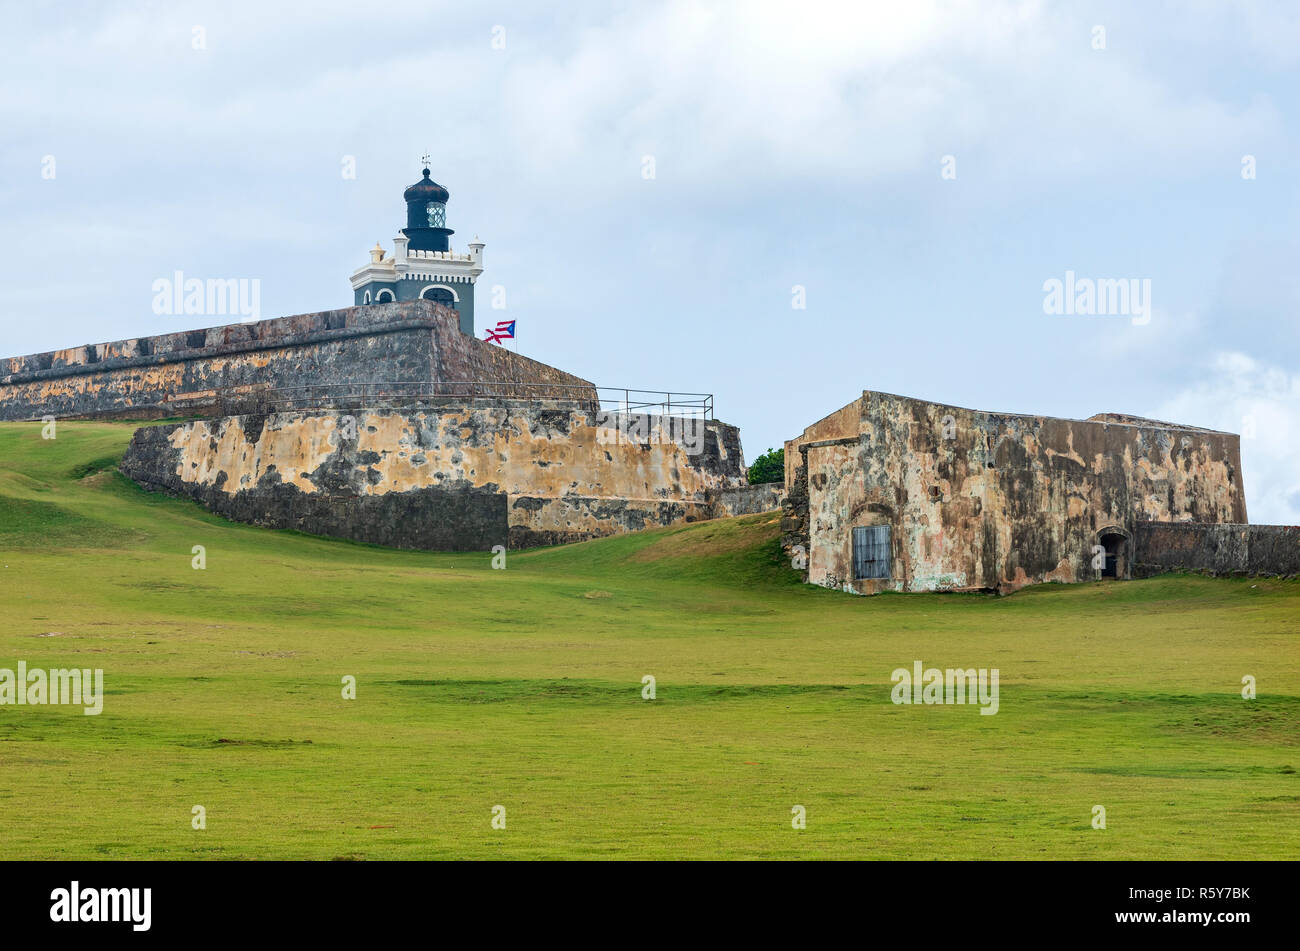 historic el morro fortress lighthouse bastion and walls in old san juan puerto rico Stock Photo